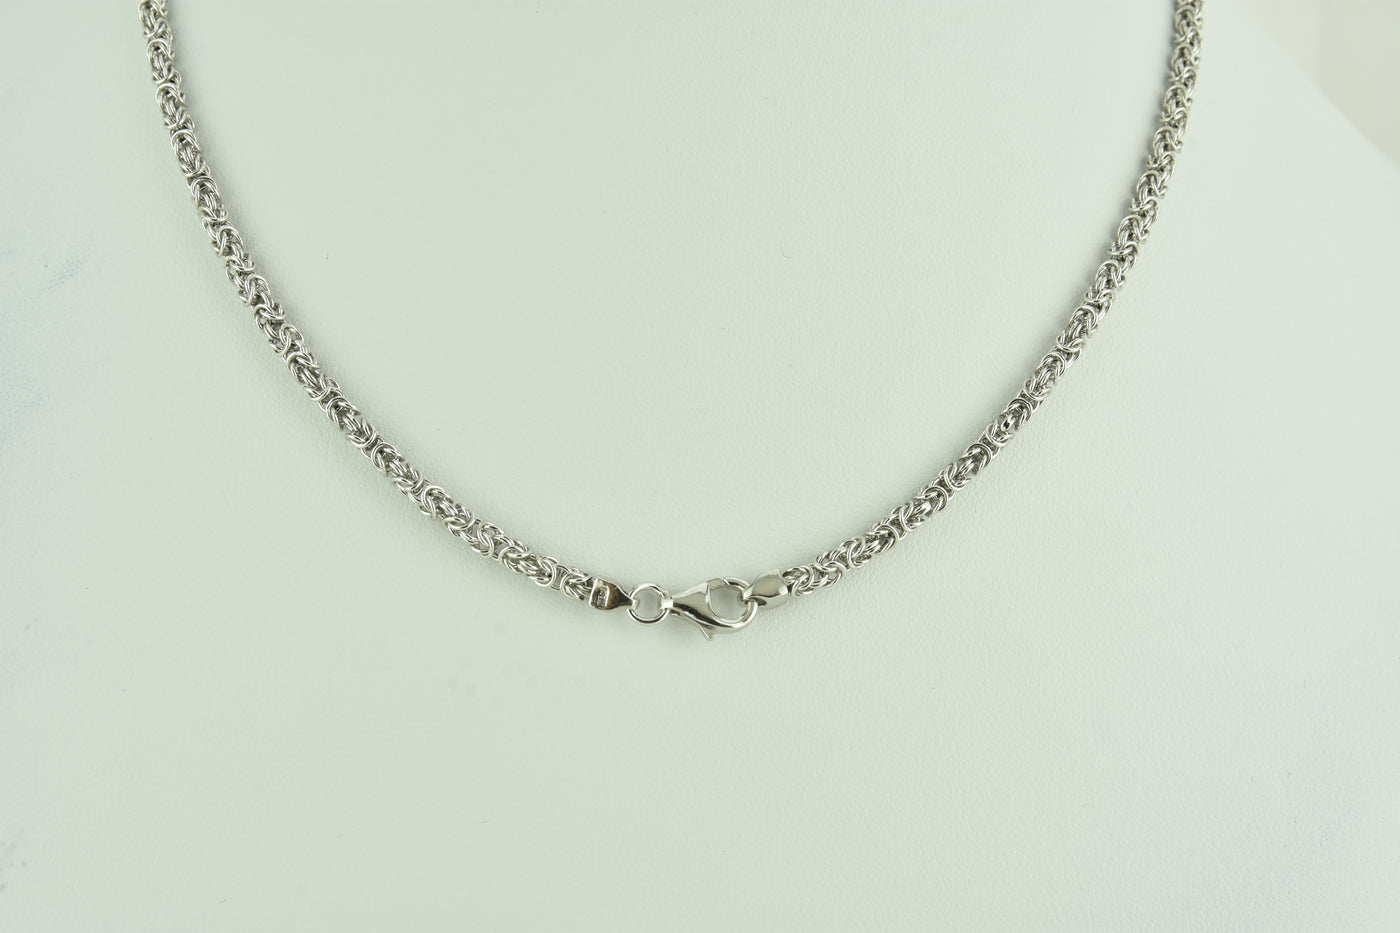 Byzantine Sterling Silver Chain with White Rhodium plate